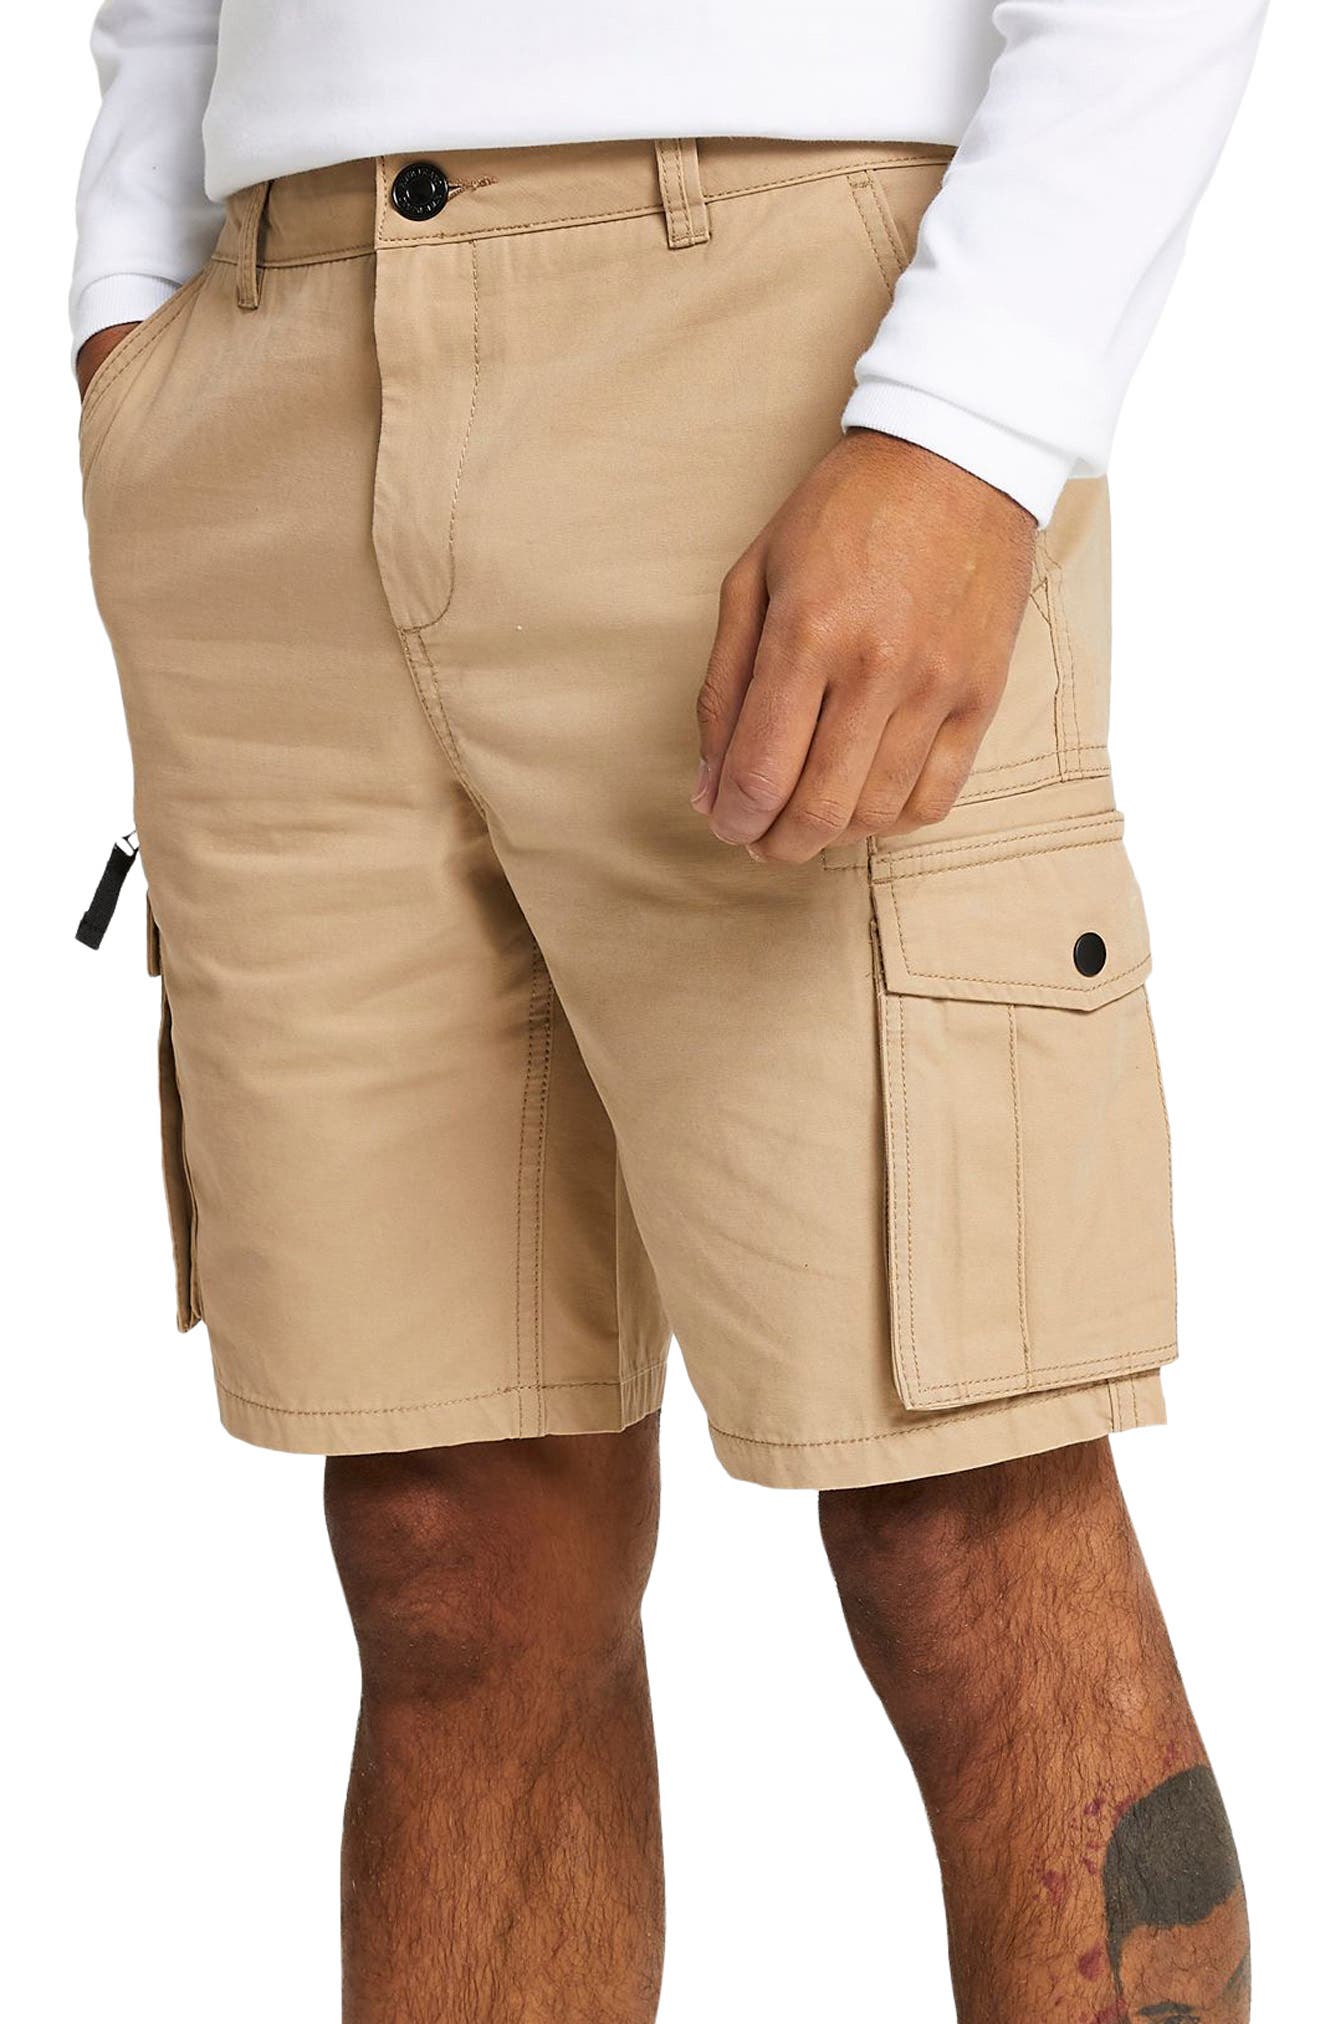 UPC 039703000079 product image for River Island Garment Washed Cargo Shorts, Size 30 in Brown at Nordstrom | upcitemdb.com